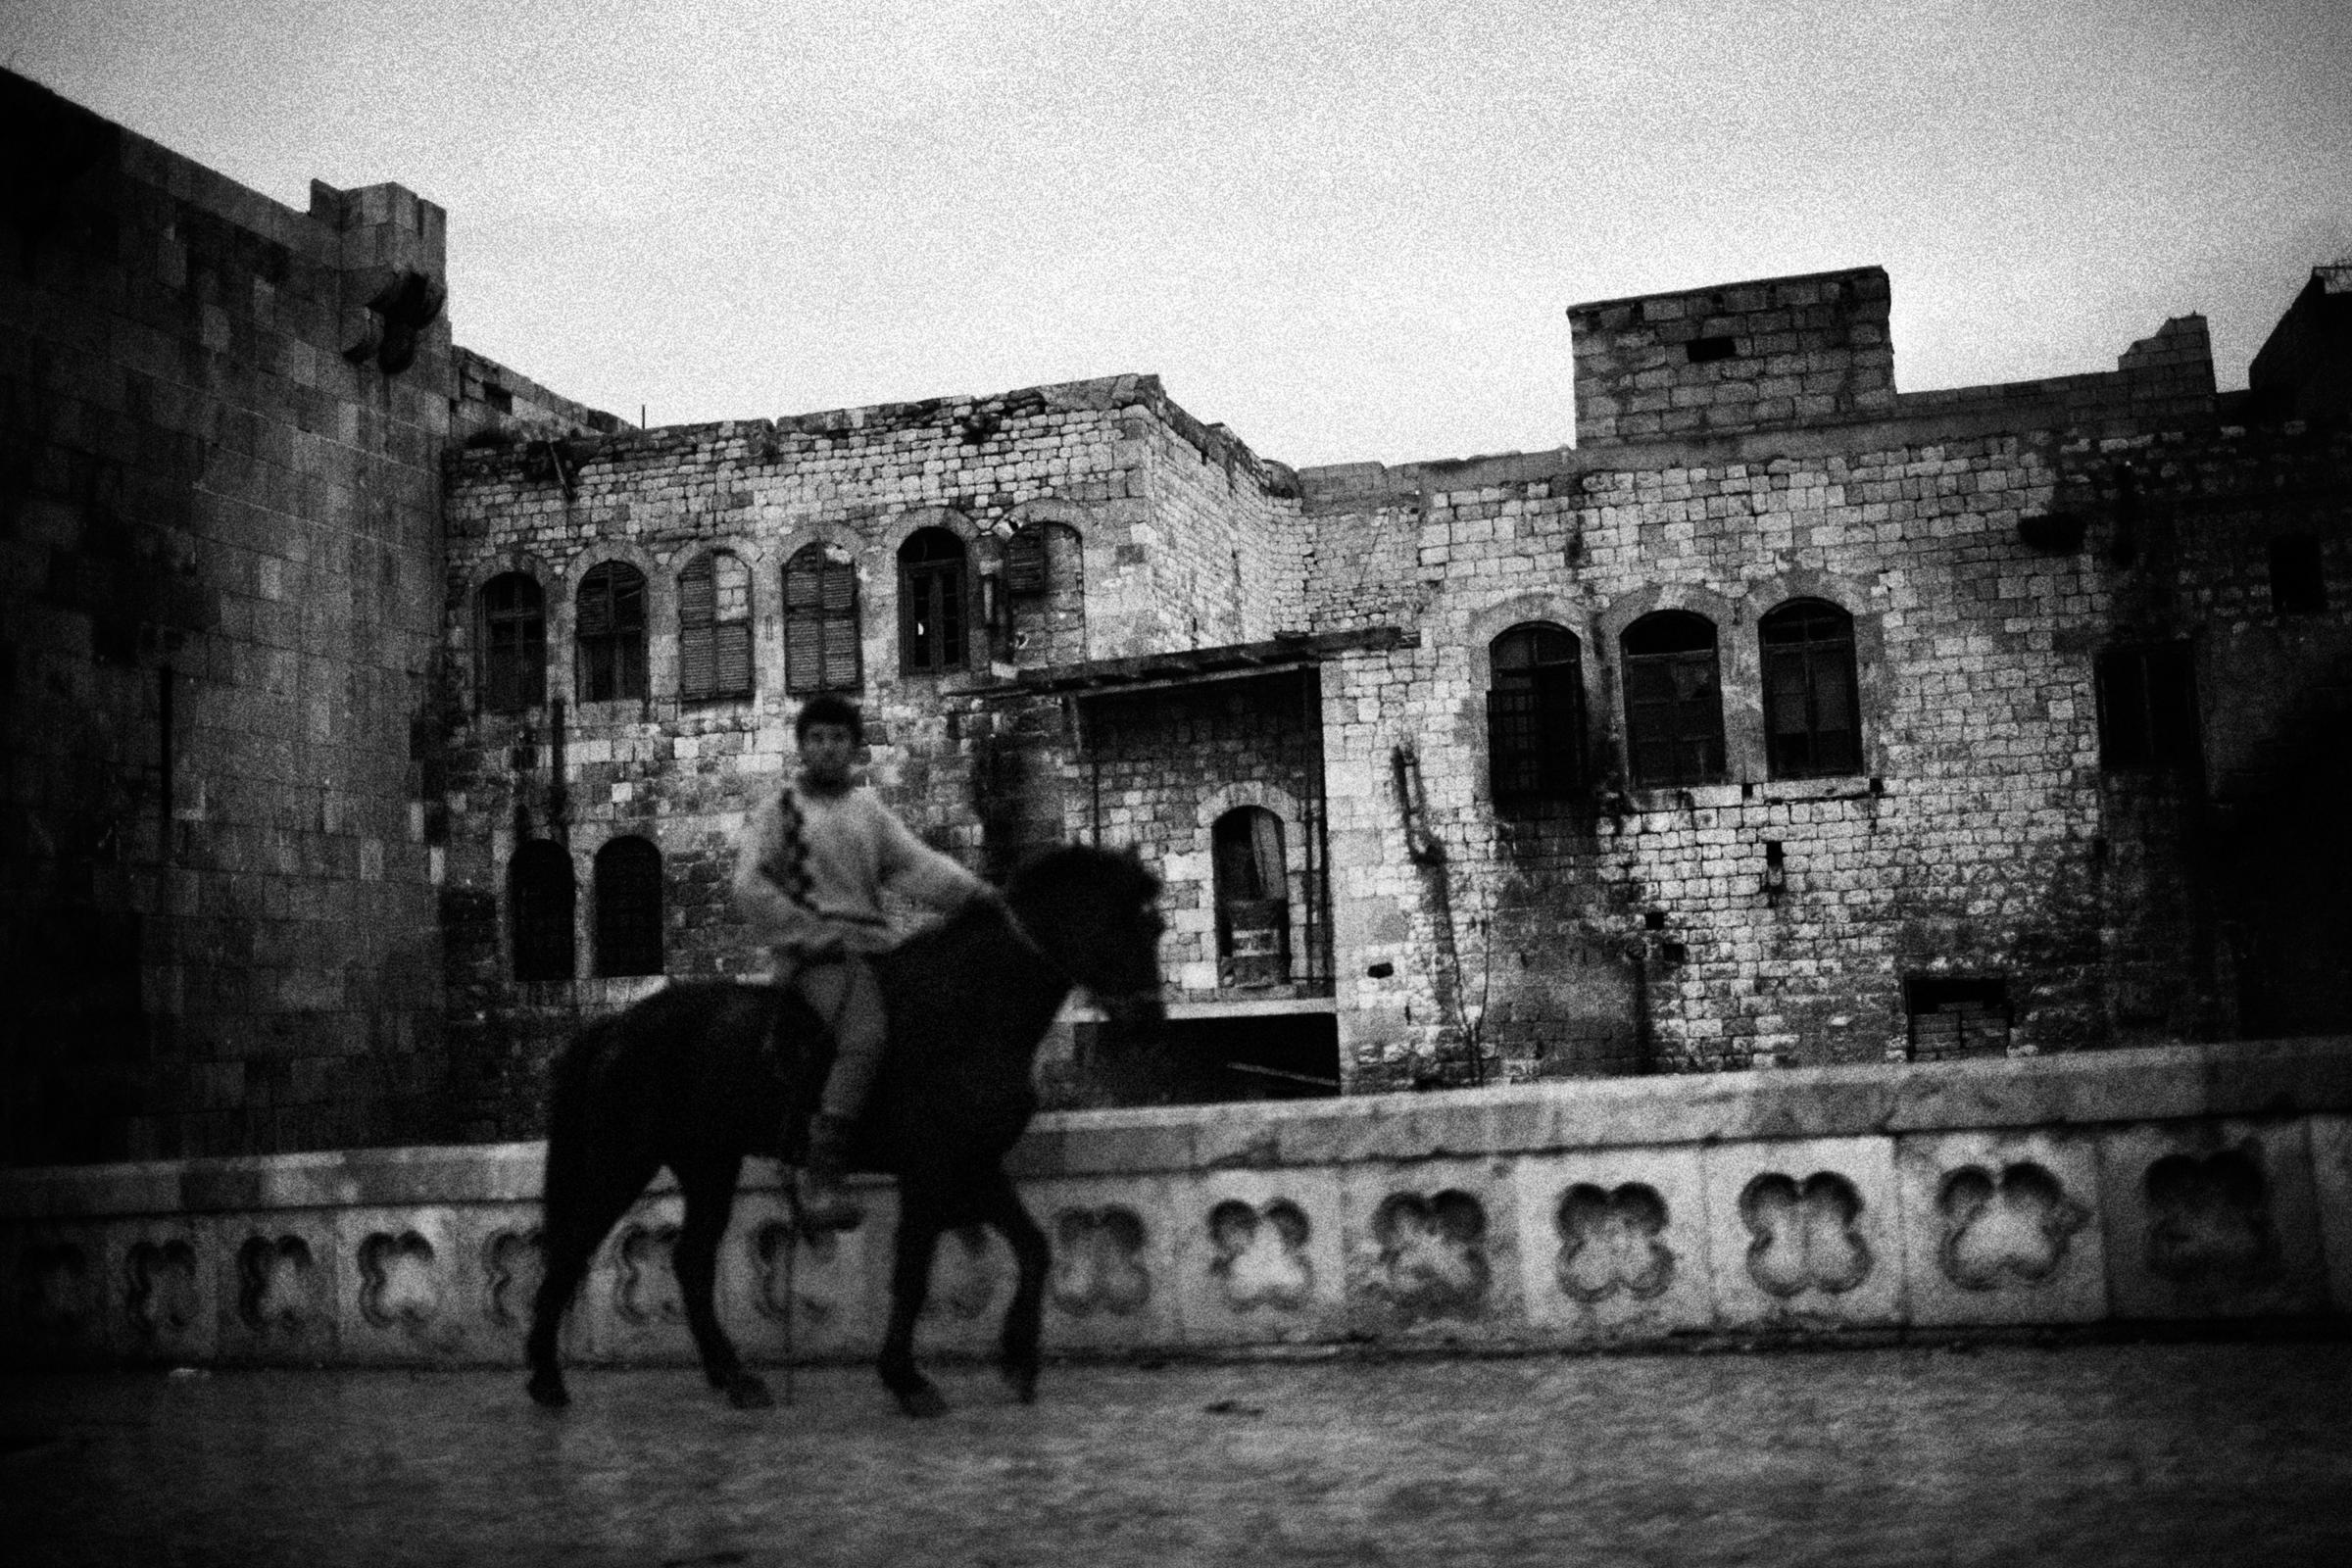 Alepo Scaring Frontlines - A boy riding a horse near the Old Town frontline of...